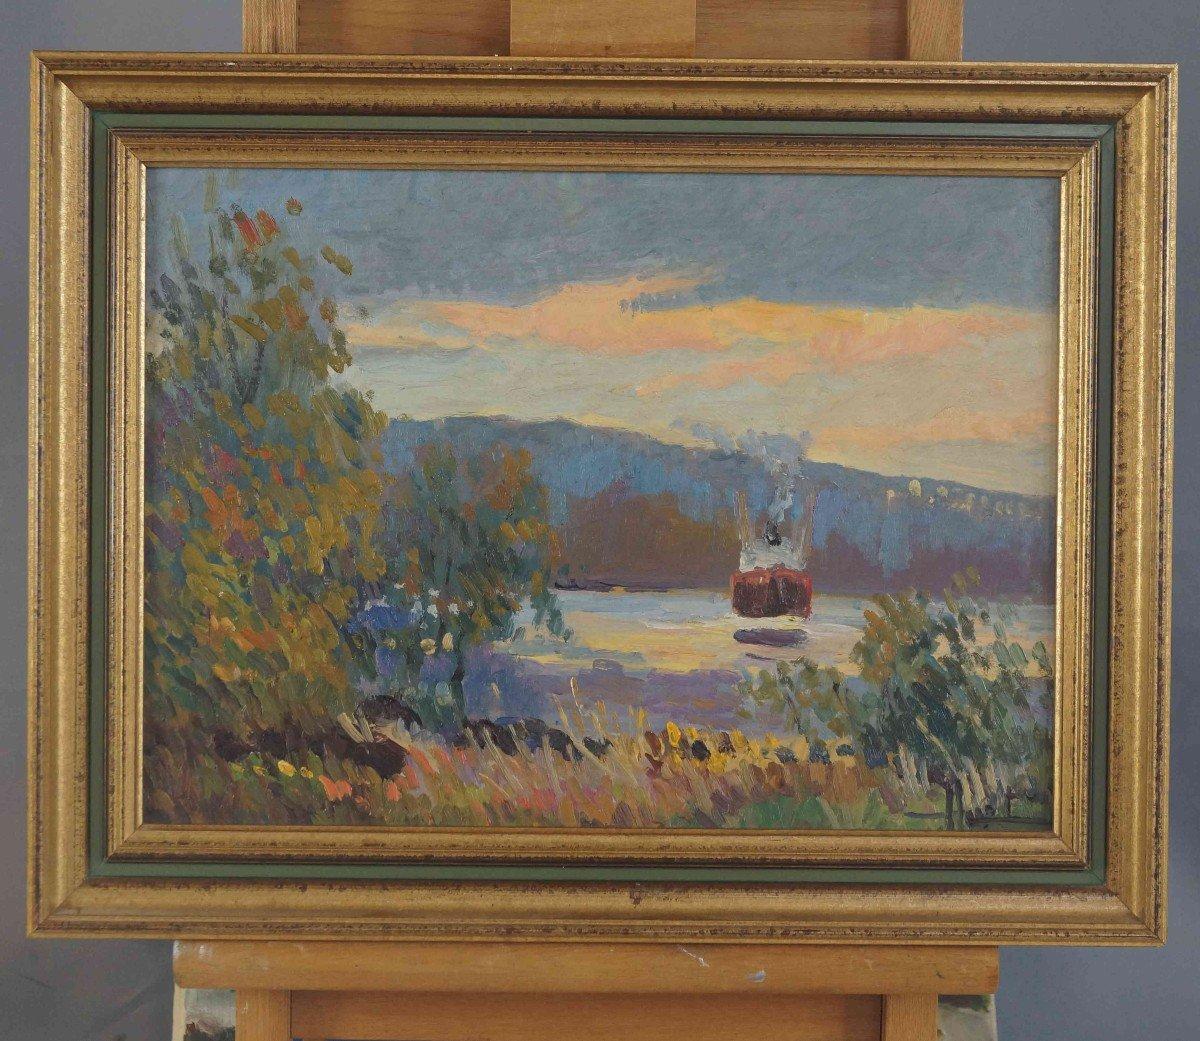 Boat at the Sunset, Original Oil on Panel, Impressionist style 1